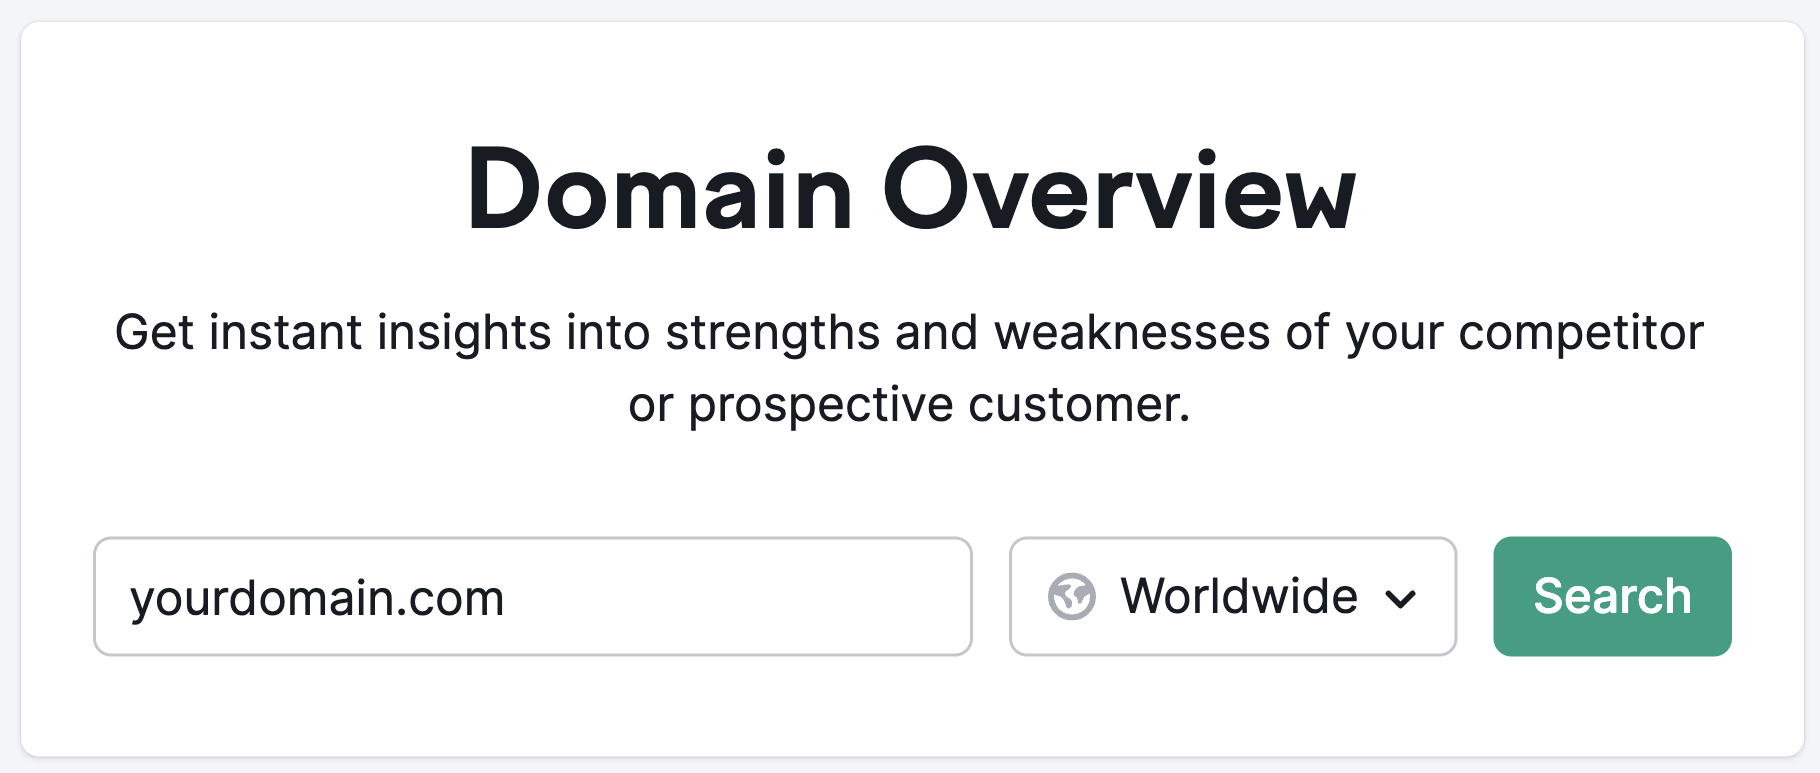 domain overview tool